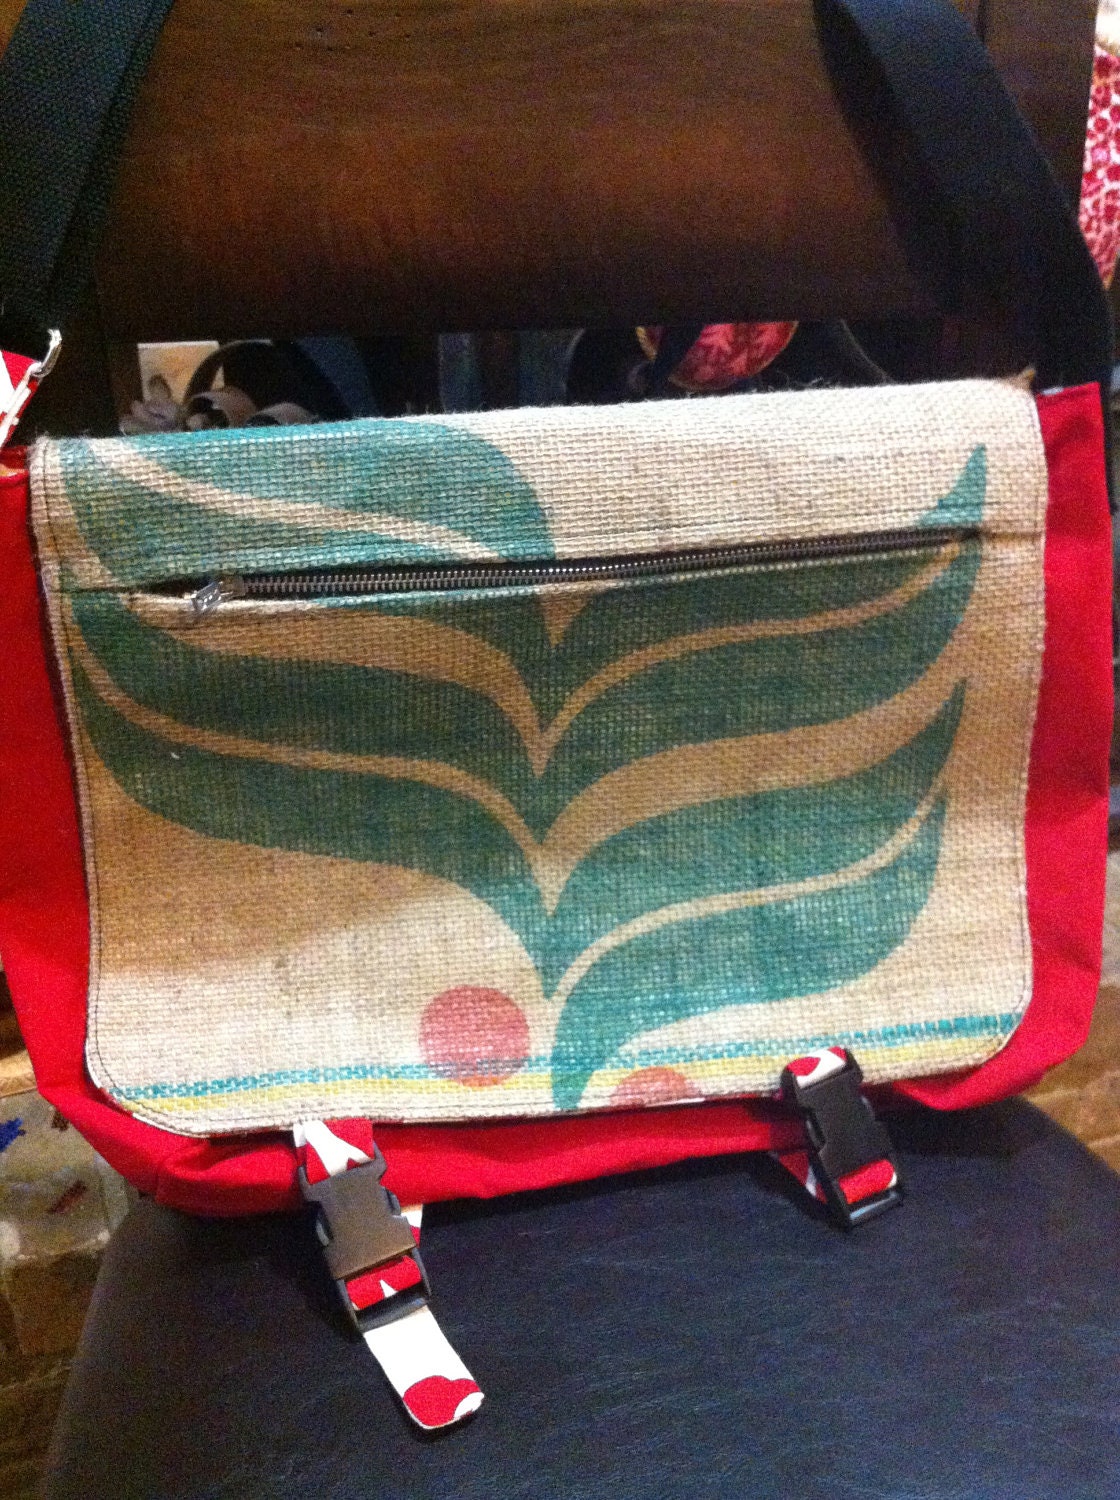 Upcycled Red Chevron and Floral Messenger Bag - Made using recycled coffee sack